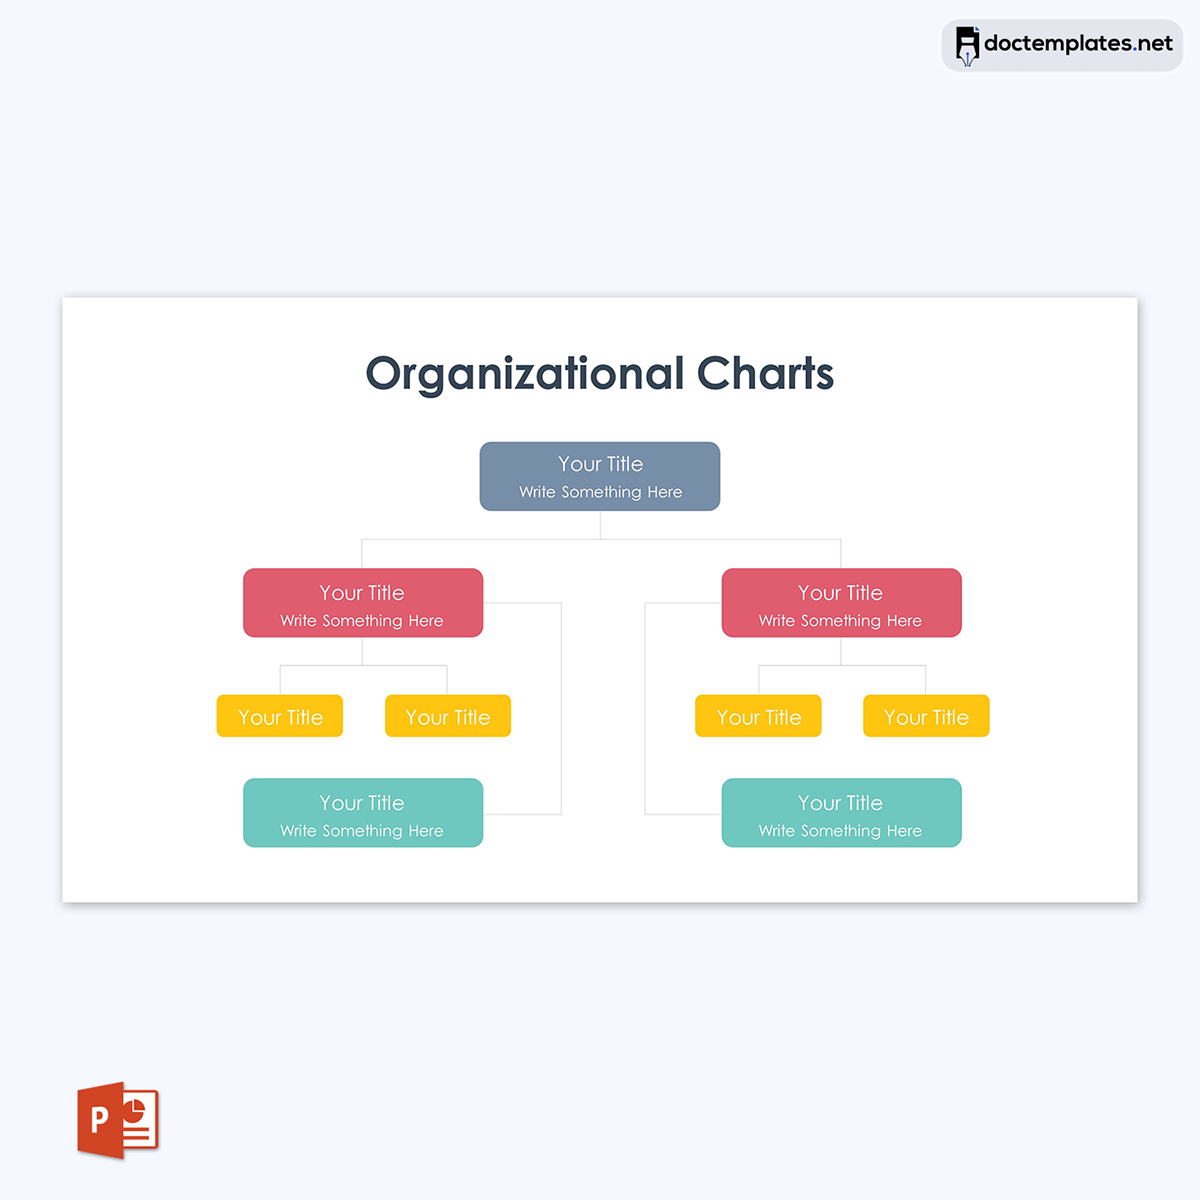 
how to create an org chart in visio from excel 02